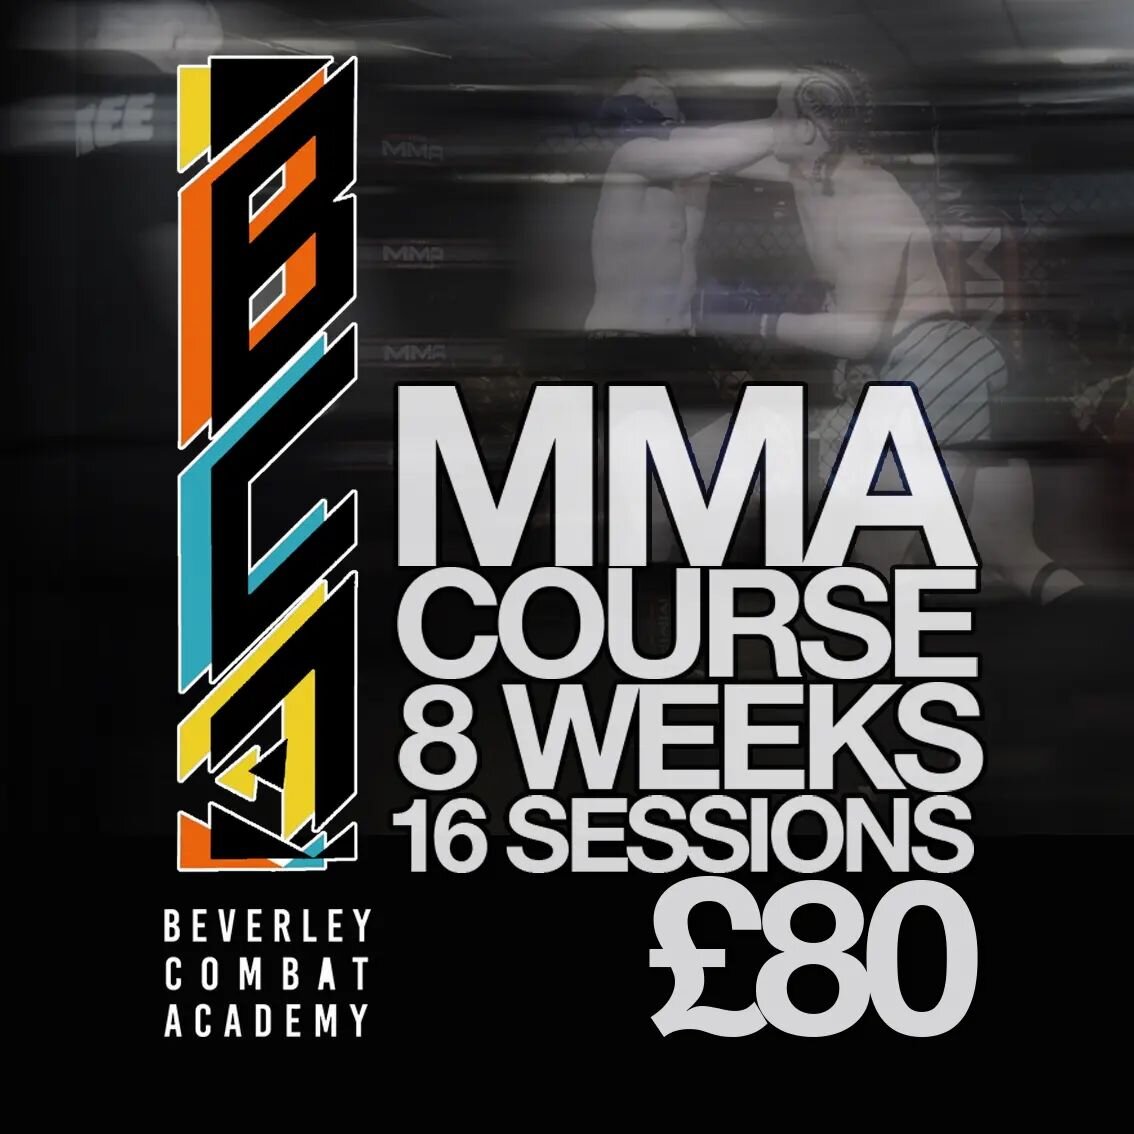 commencing 12th of June

Get in the best shape of your life in our 8 week beginners MMA course.

Train under a multiple national champion @sam_wilkinson_mma and coach to some of the UKs best athletes such as @joefieldsmma

FIGHT on our BCA Interclub 